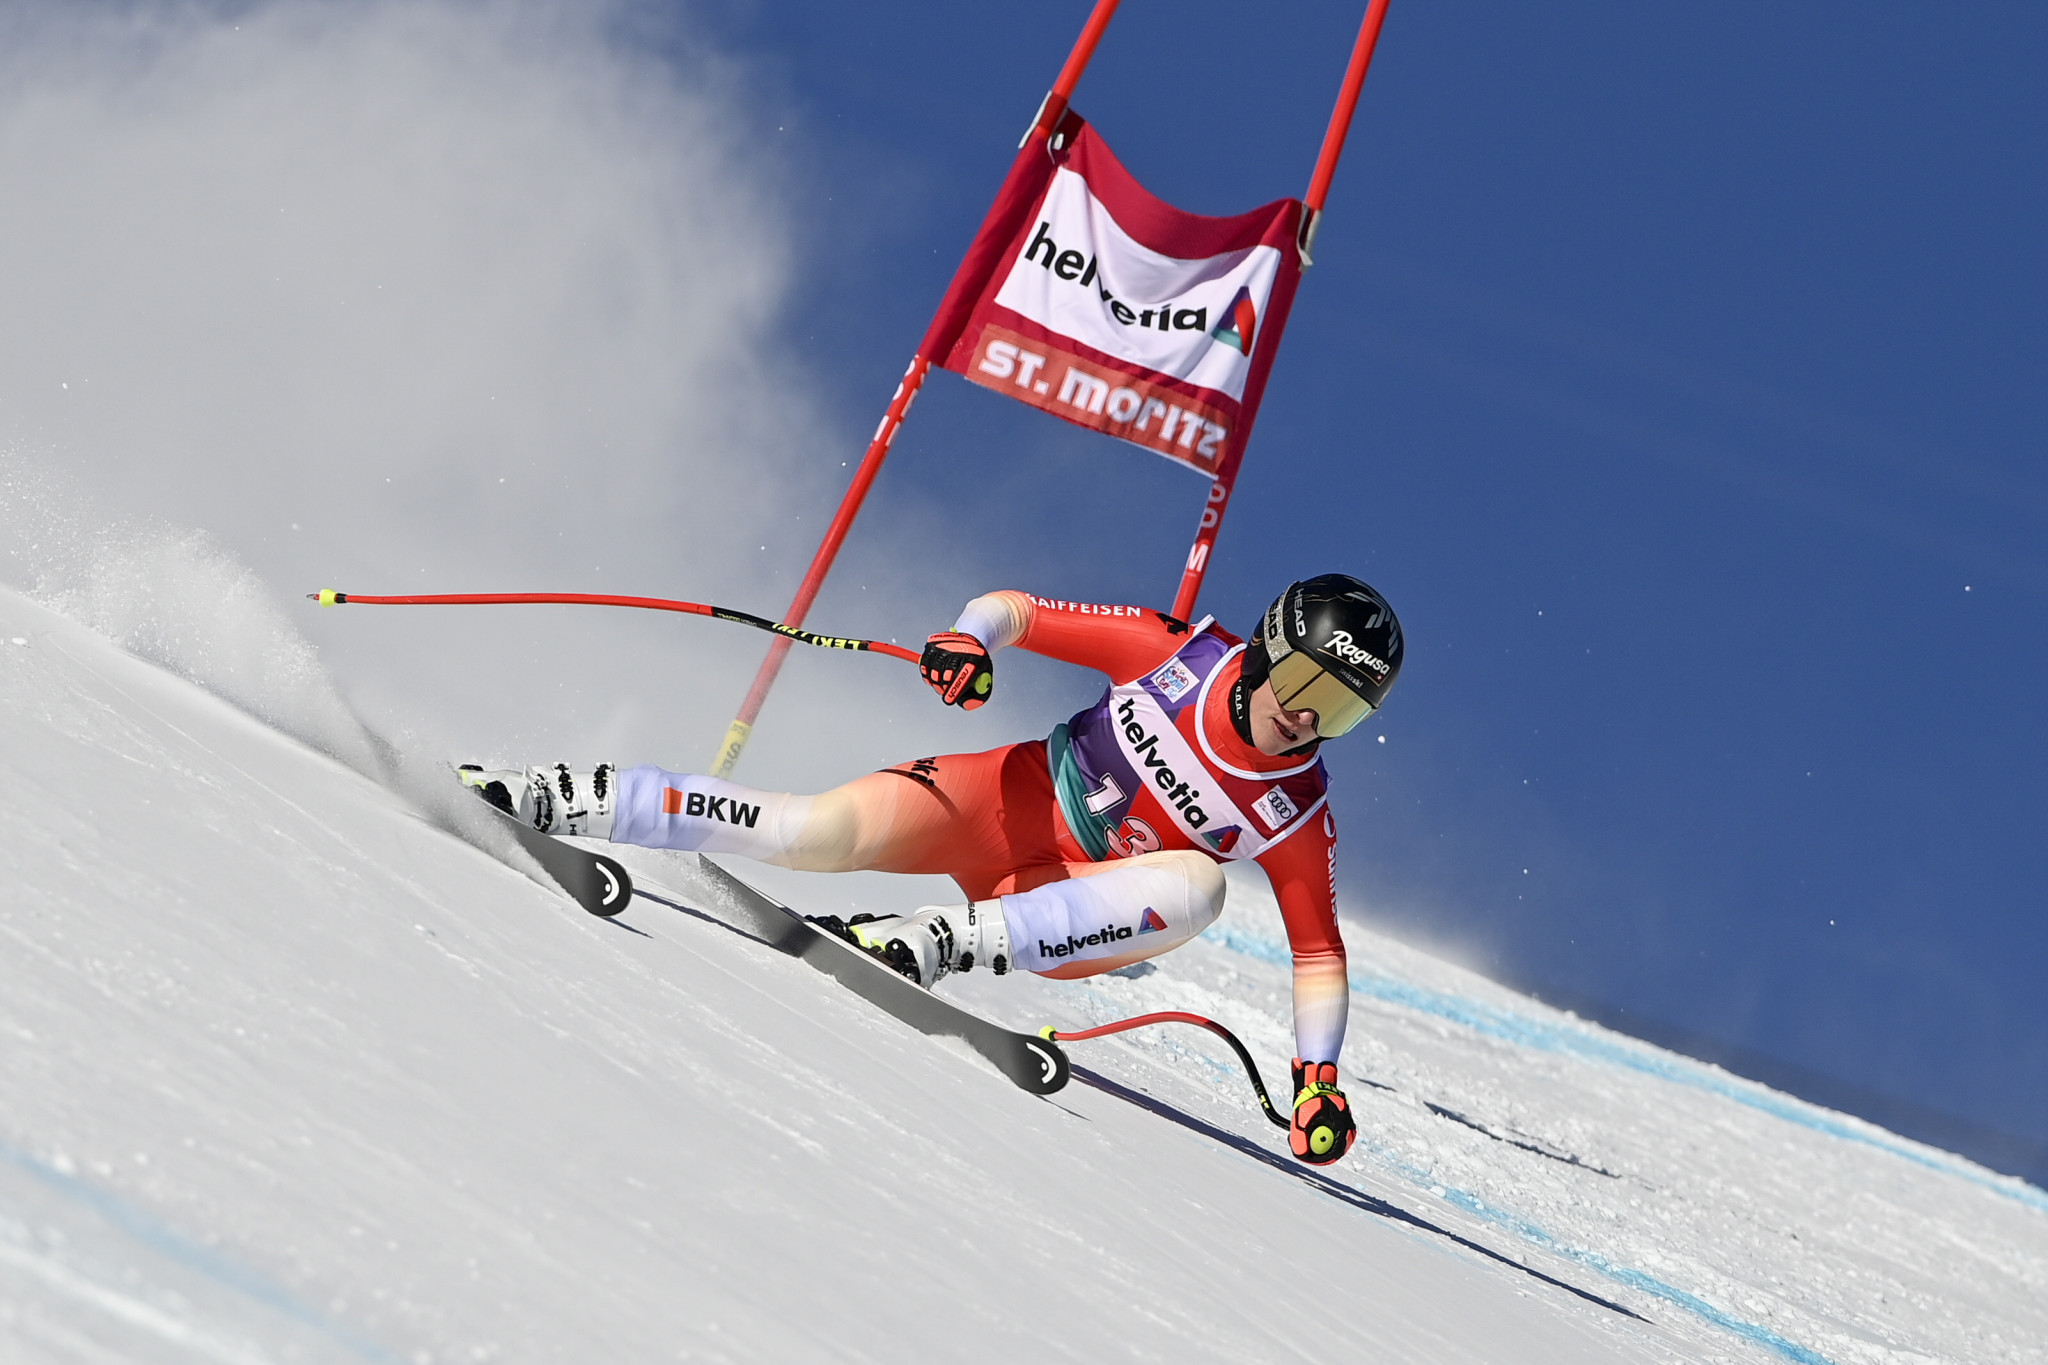 Switzerland's Lara Gut Behrami finished 8th in the World Cup Super G won by Mikaela Shiffrin on Sunday ©Getty Imagess